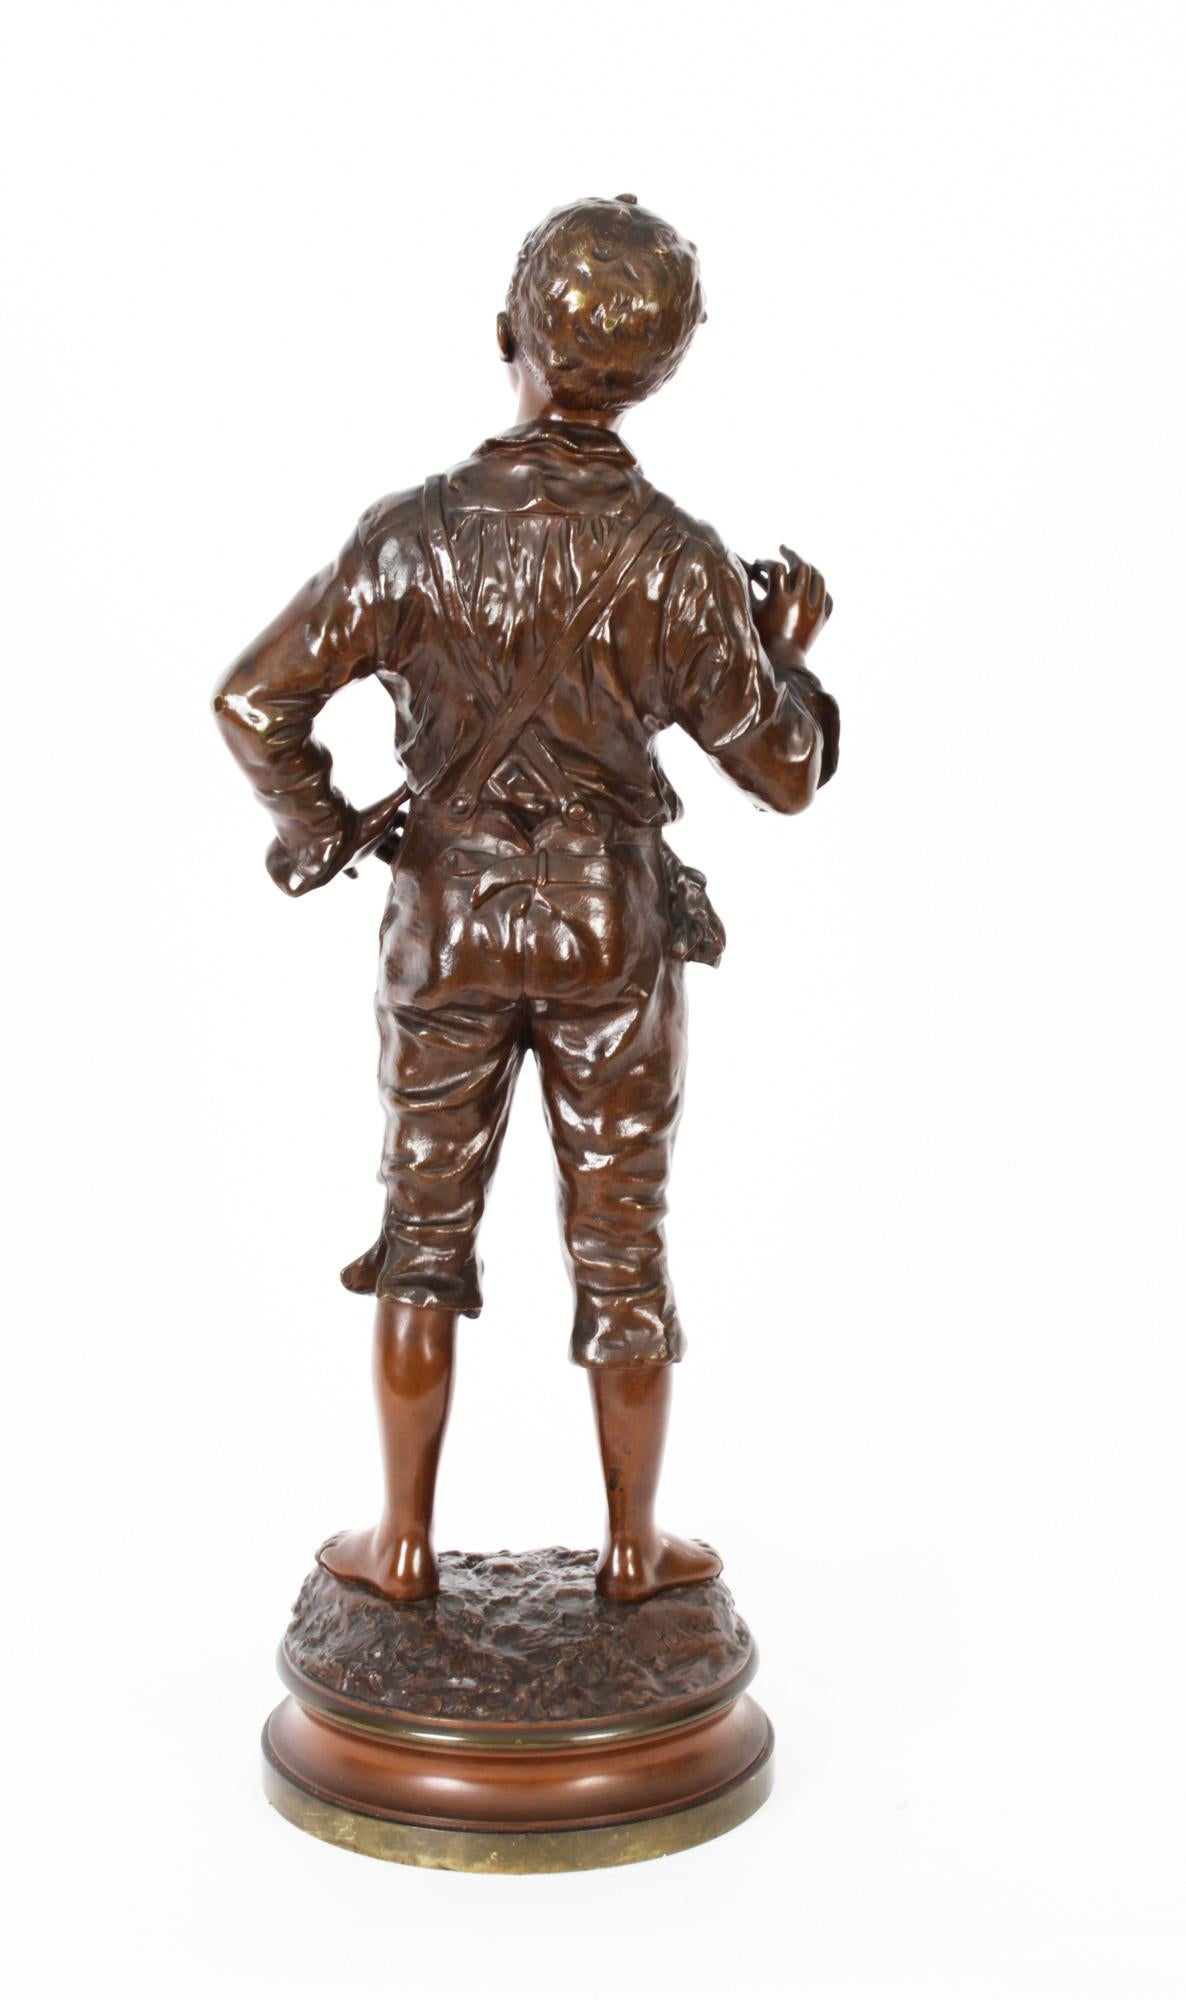 Antique Bronze Street Urchin by Charles Anfrie, 1833-1905', 19th Century For Sale 4